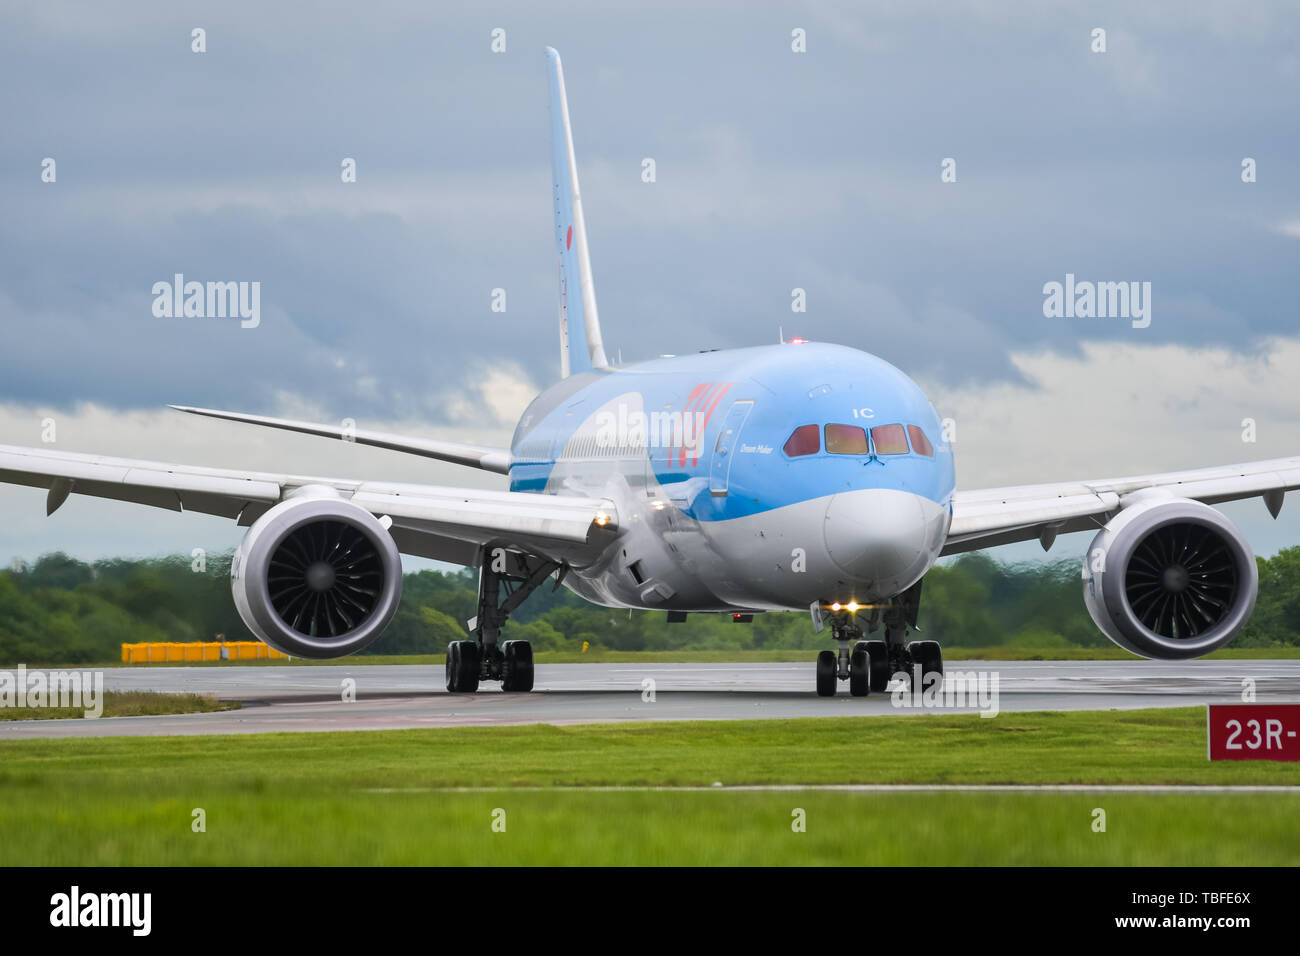 MANCHESTER UK, 30 MAY 2019: TUI Boeing 787-8 Dreamliner flight BY2429 from Dubrovnik taxies off runway 23R at Manchaester Airport after landing. Stock Photo